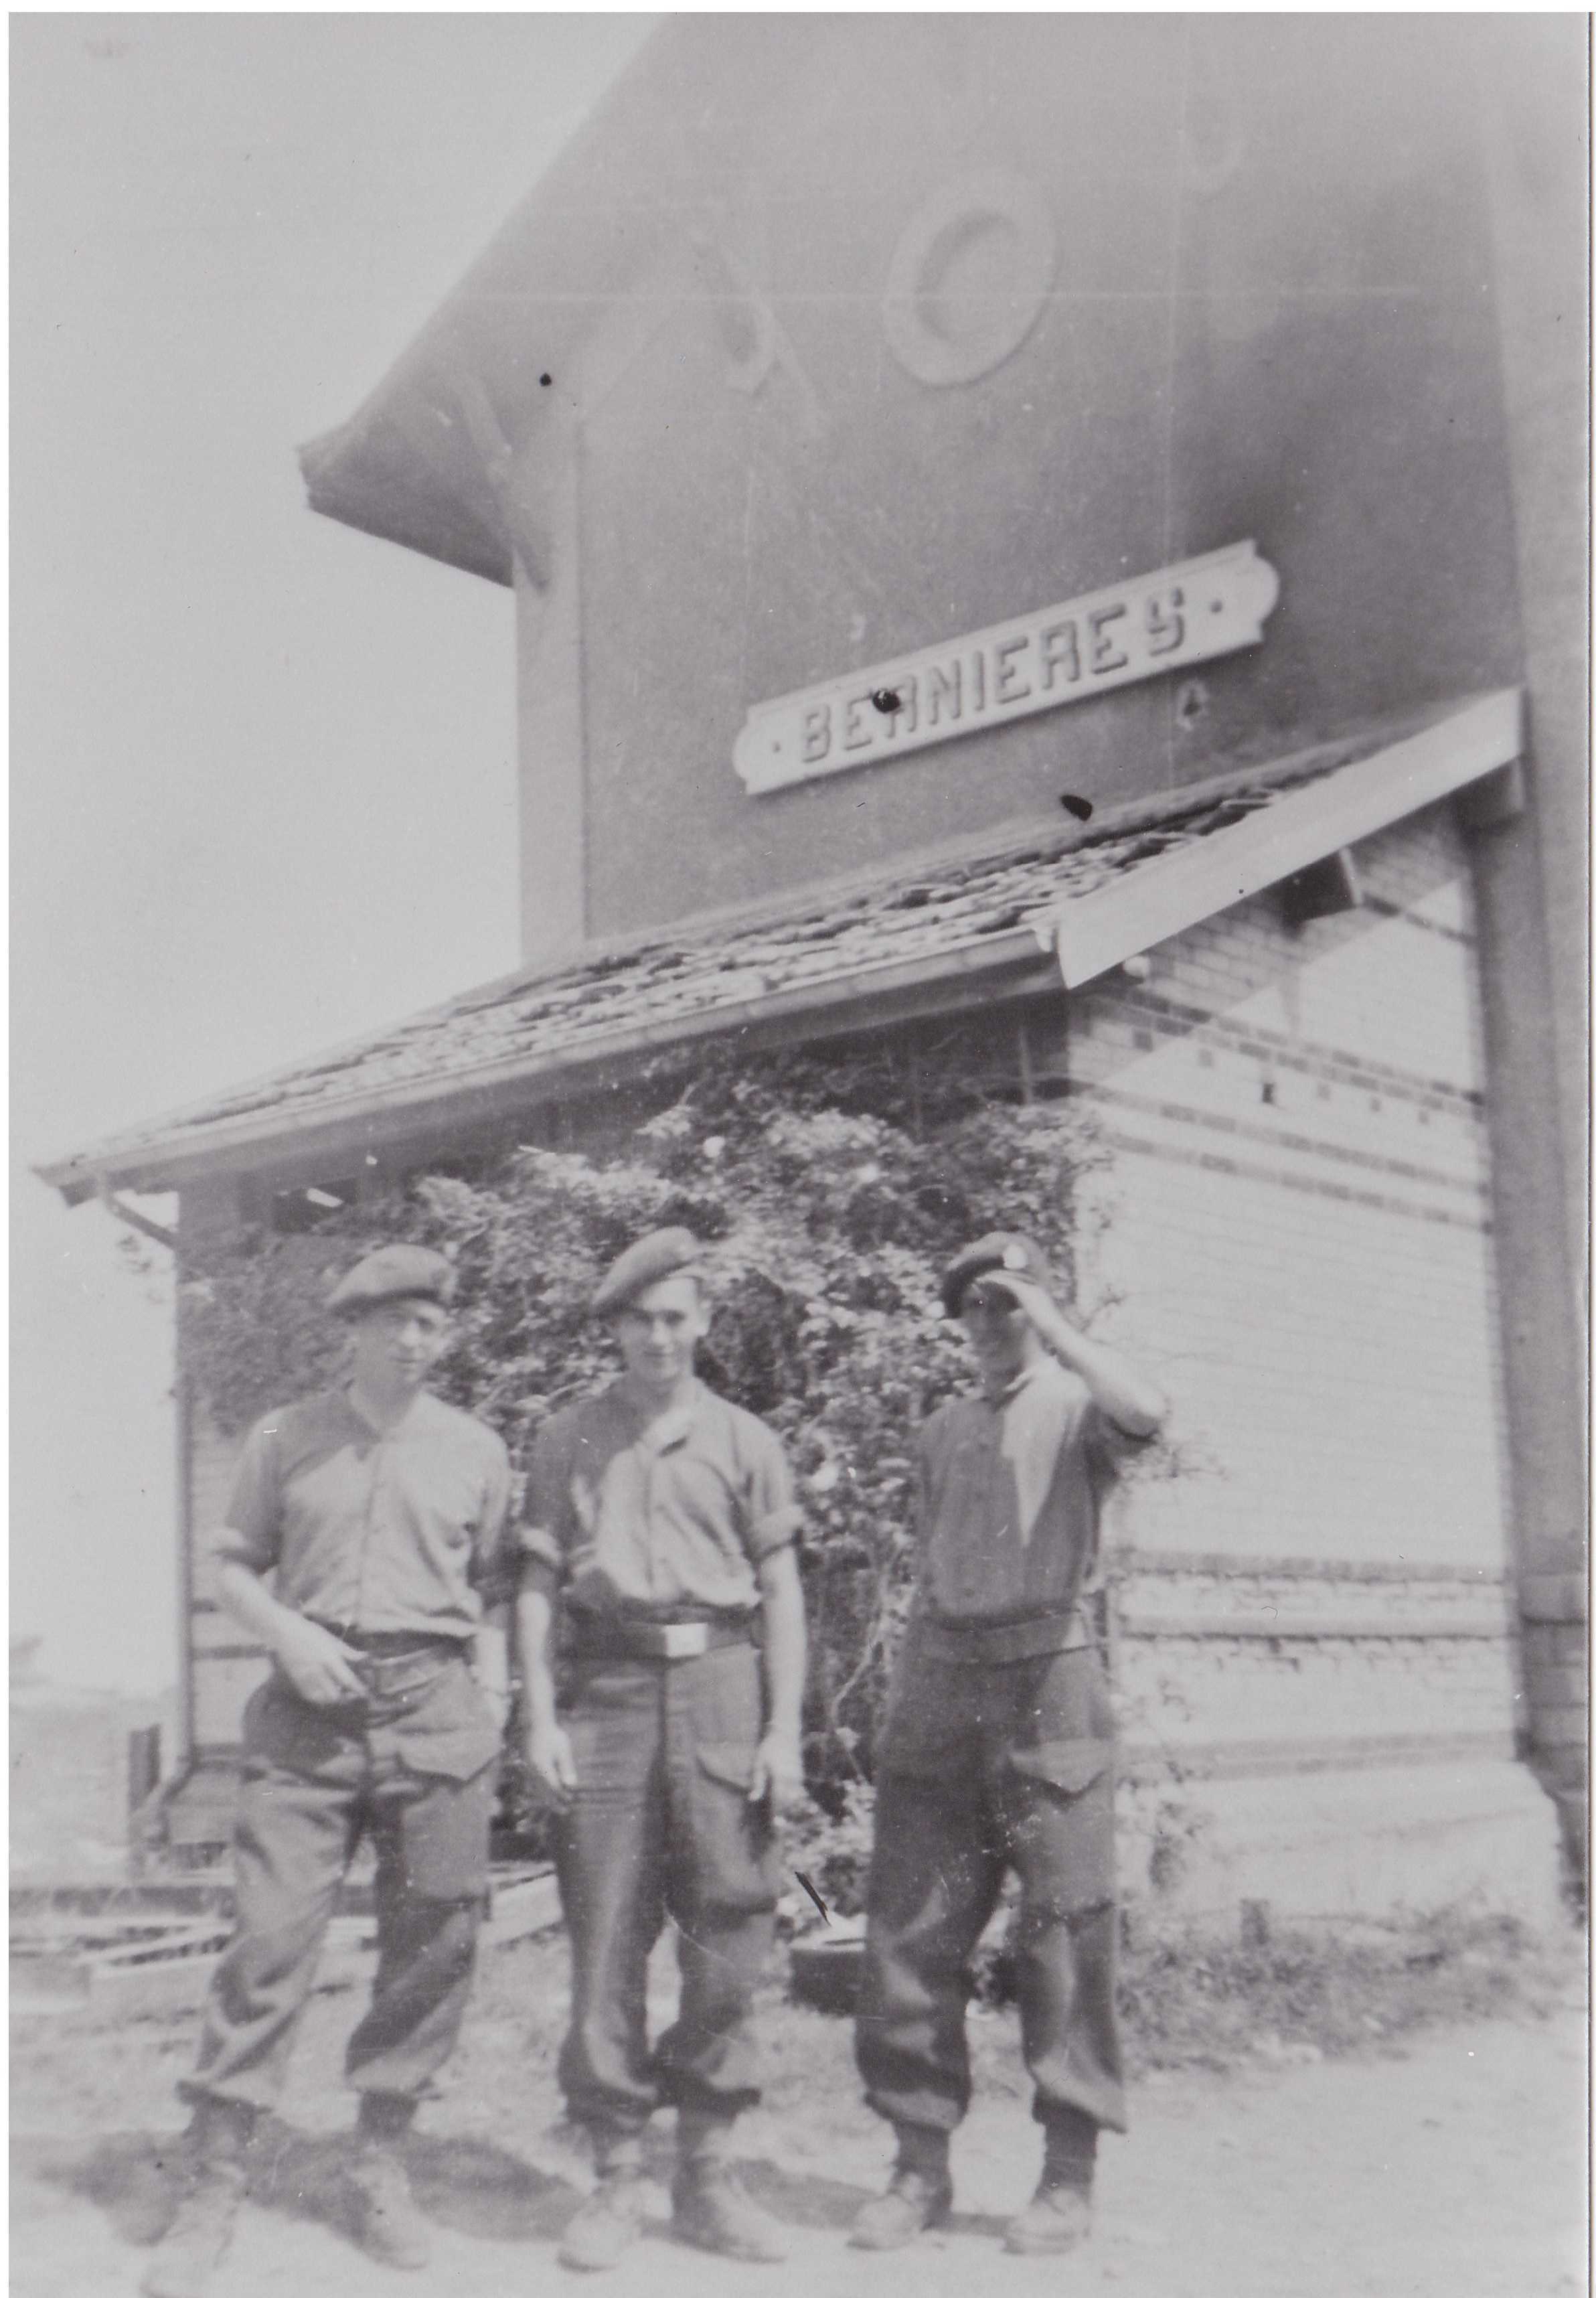 Black and white photograph. Three Canadian men in casual military uniforms stand in front of a large building labelled "Bernieres." One holds his cap down over his eyes to shield the sun.